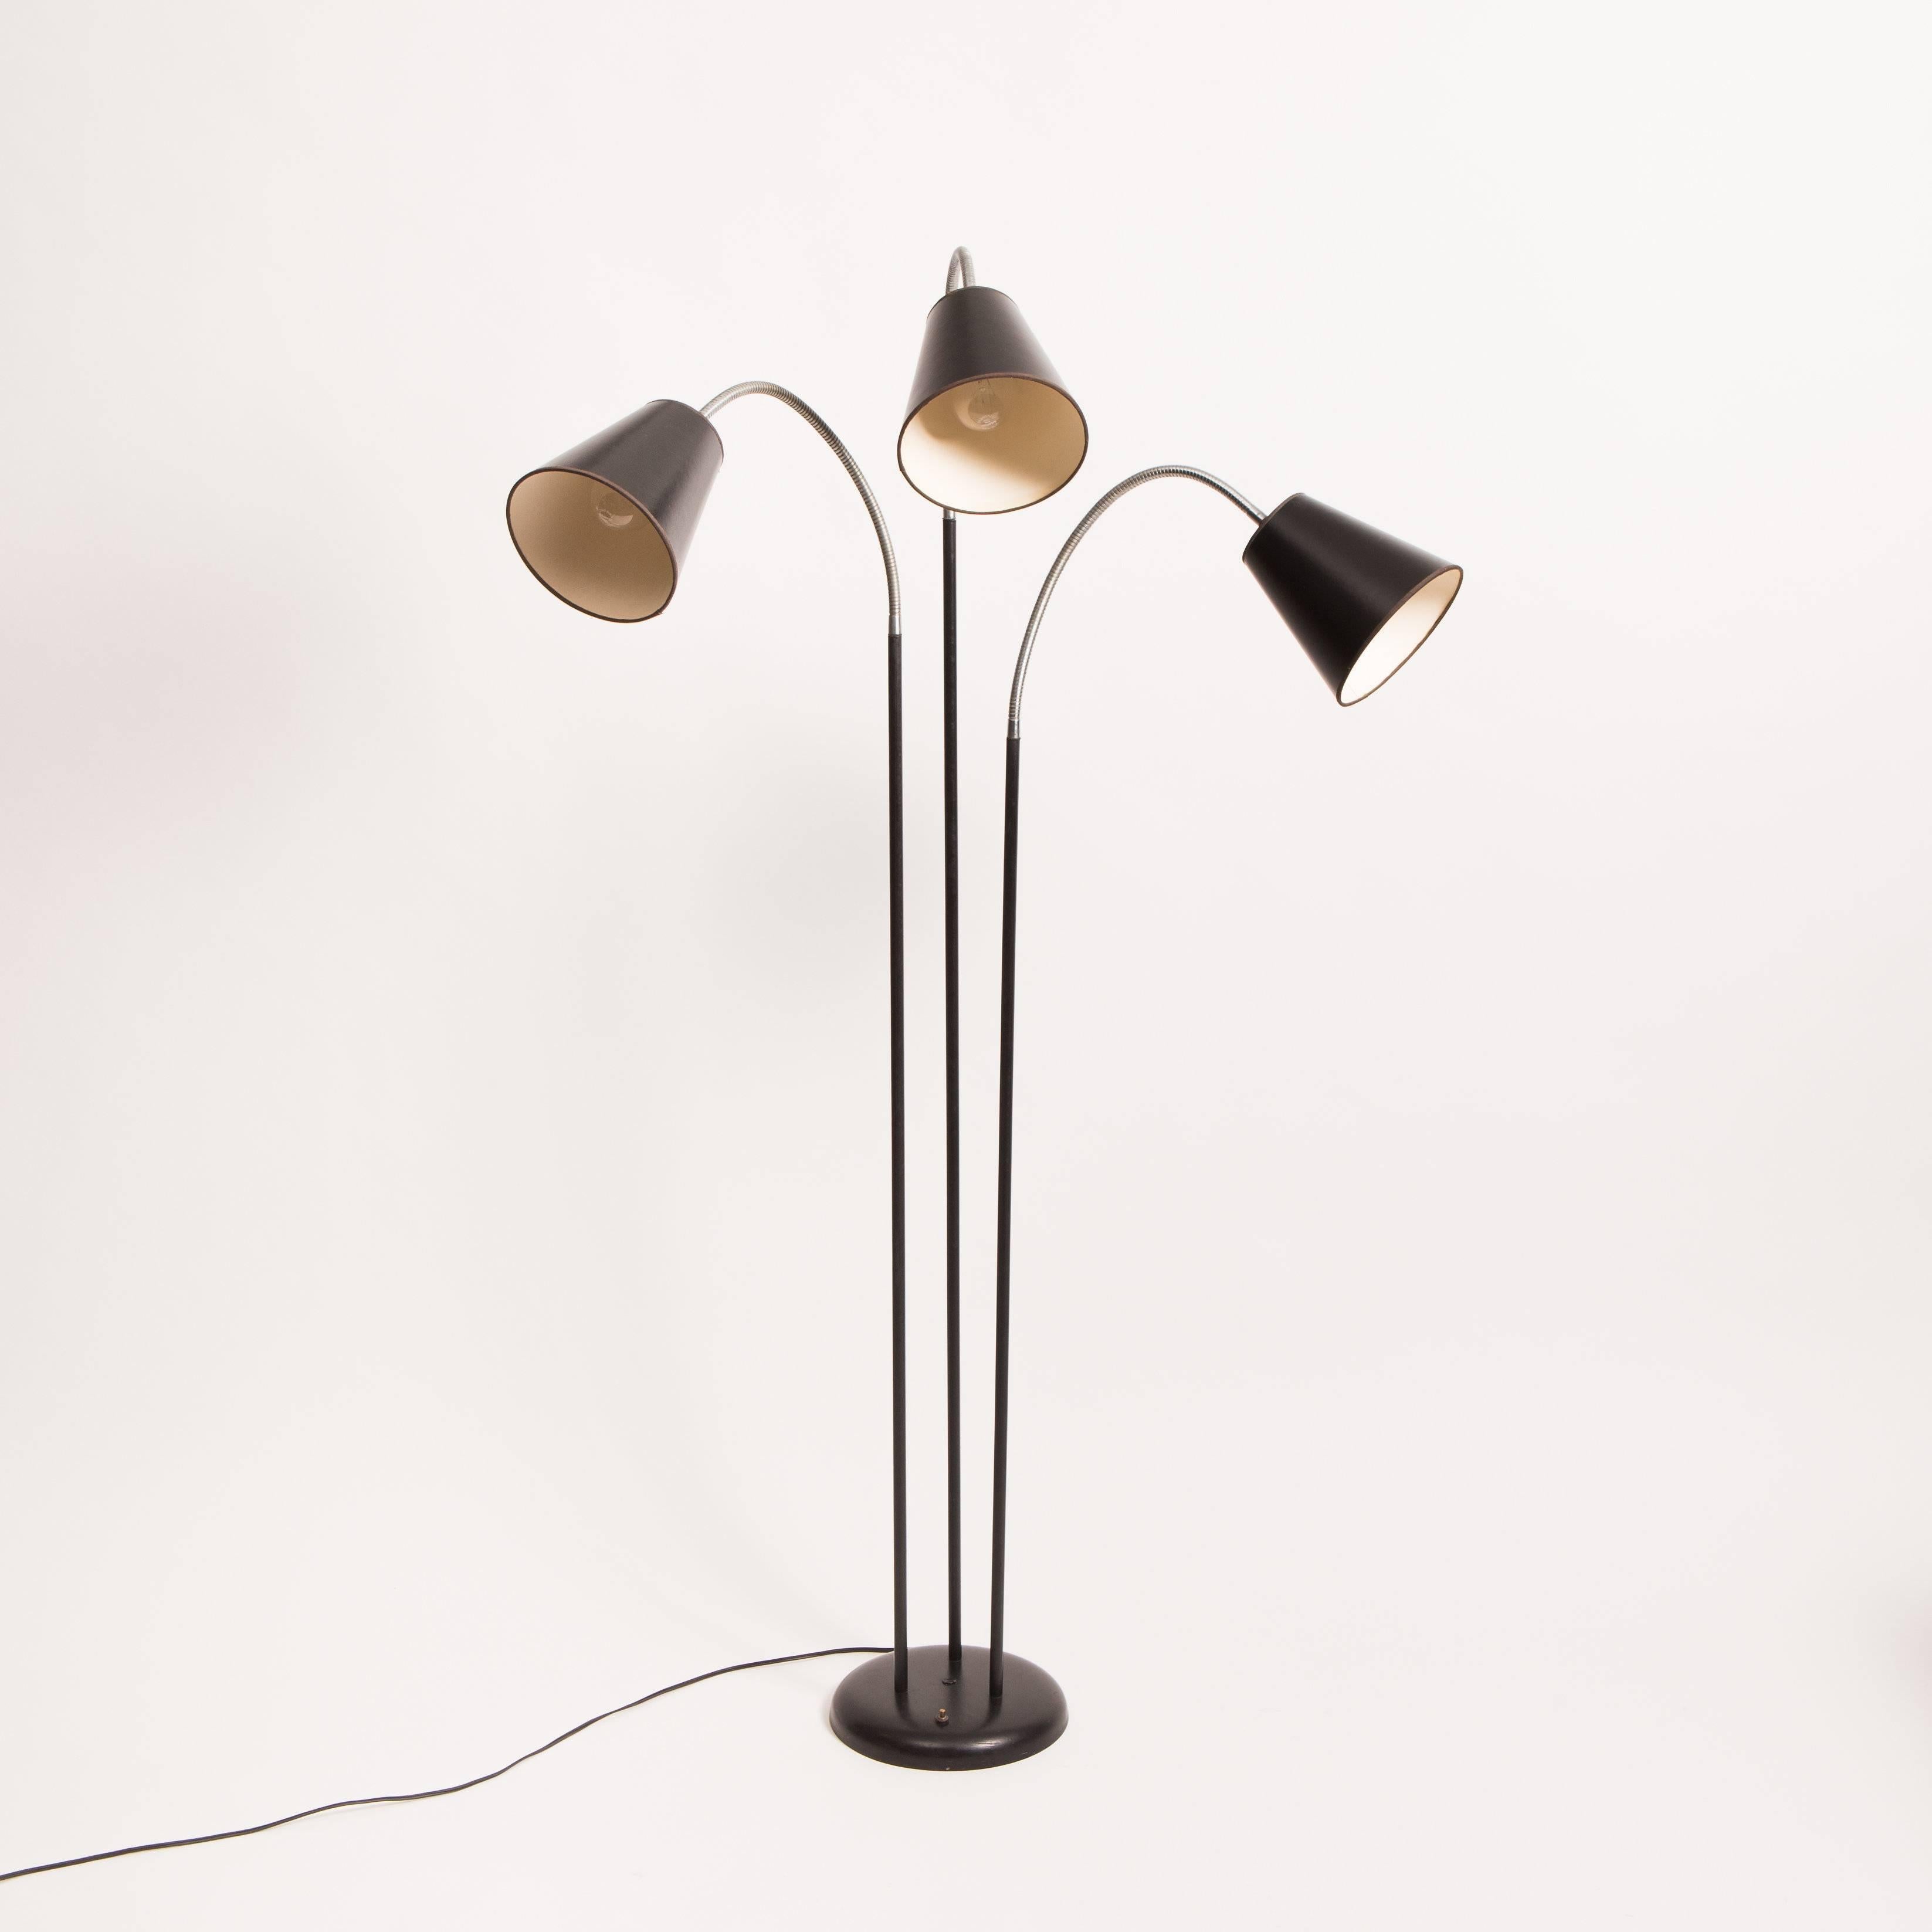 Three-arm gooseneck floor lamp with black shades by David Wurster for Raymor. Featured on page 243, of Modern Furnishings for the Home / Hennessey.